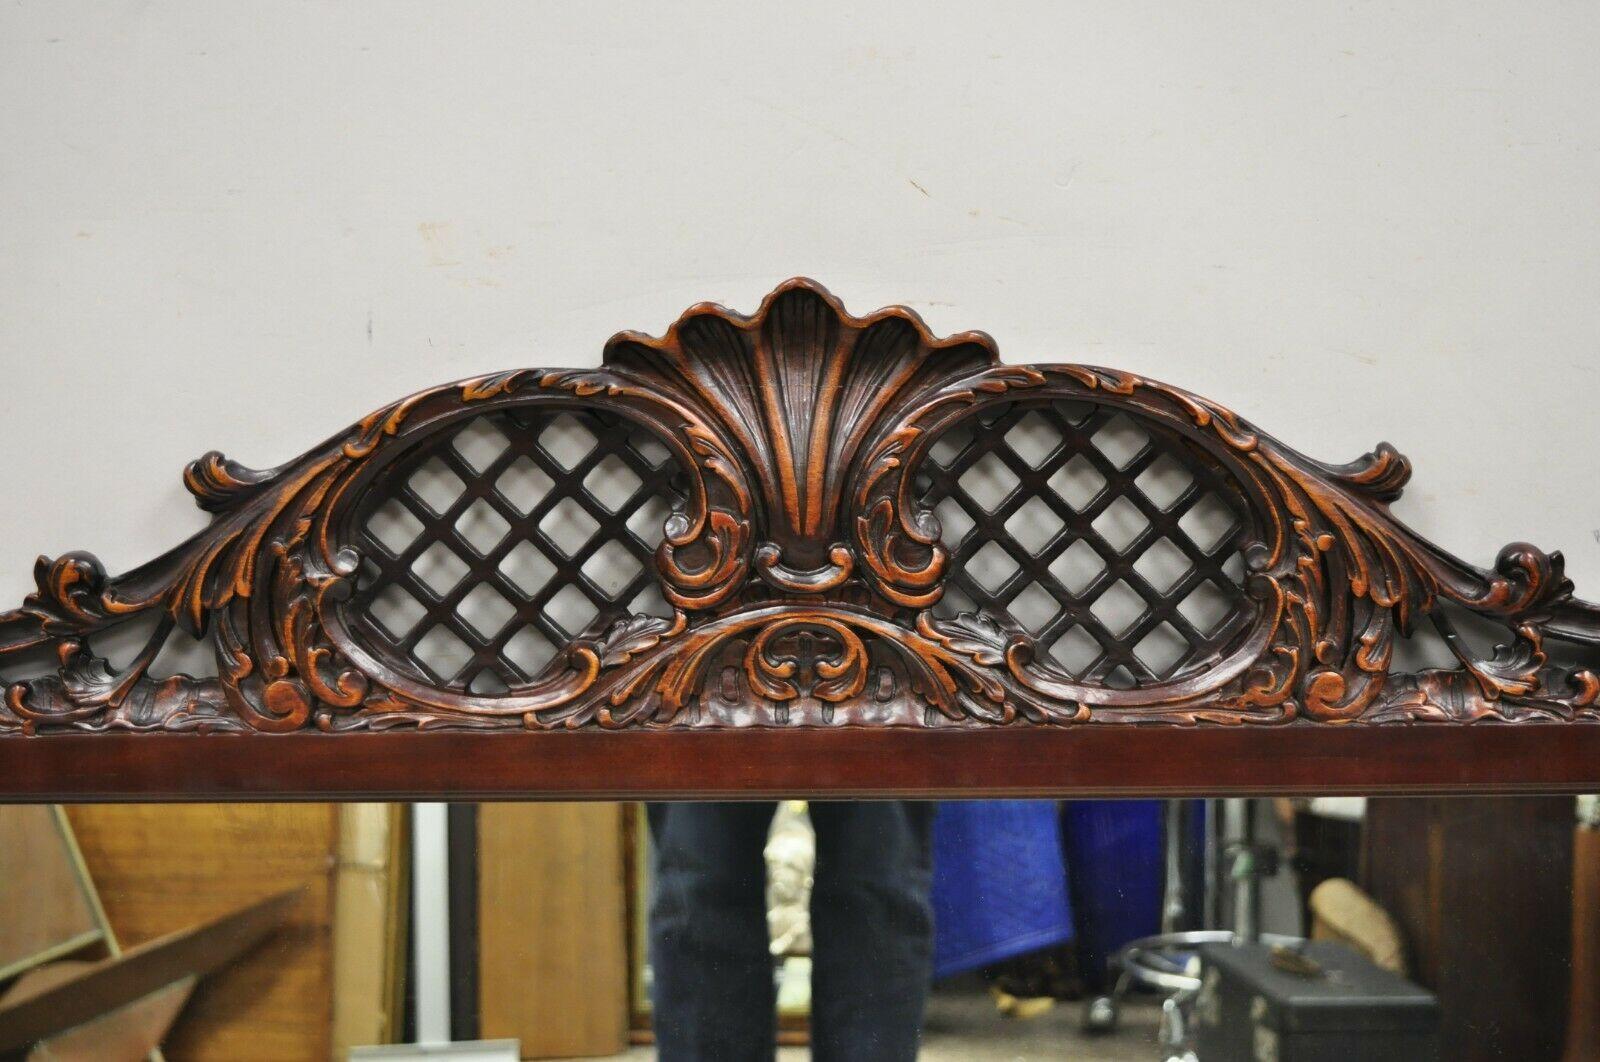 Antique Chinse Chippendale Style Fretwork carved mahogany wall mirror. Item solid wood frame, beautiful wood grain, nicely carved details, very nice antique item, quality American craftsmanship, great style and form. Circa Early to Mid 20th Century.